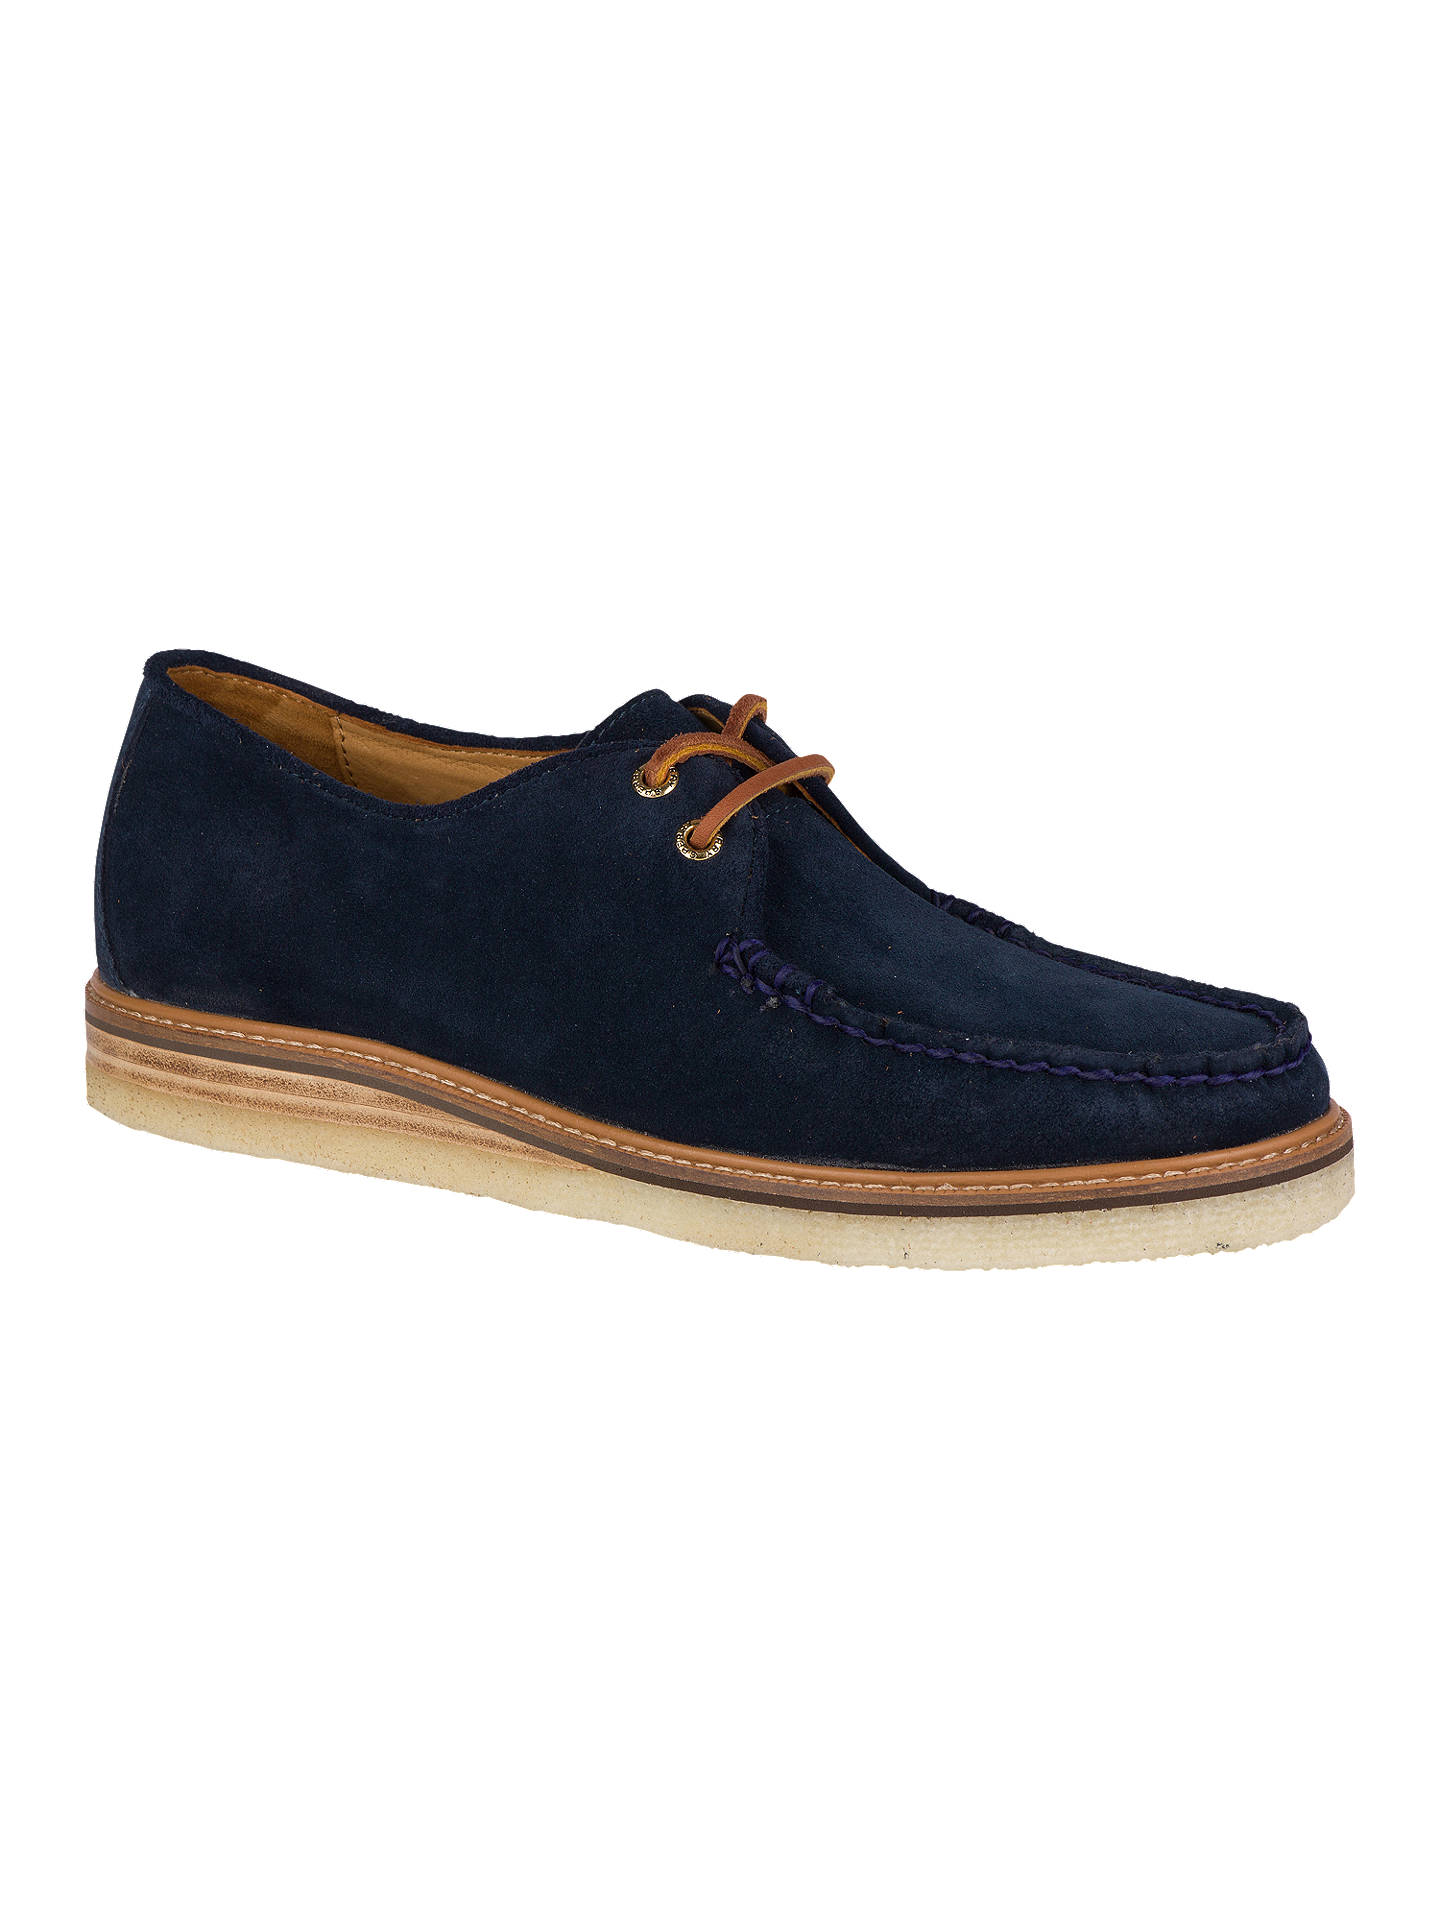 TOMS Captains Suede Boat Shoes, Navy at John Lewis & Partners